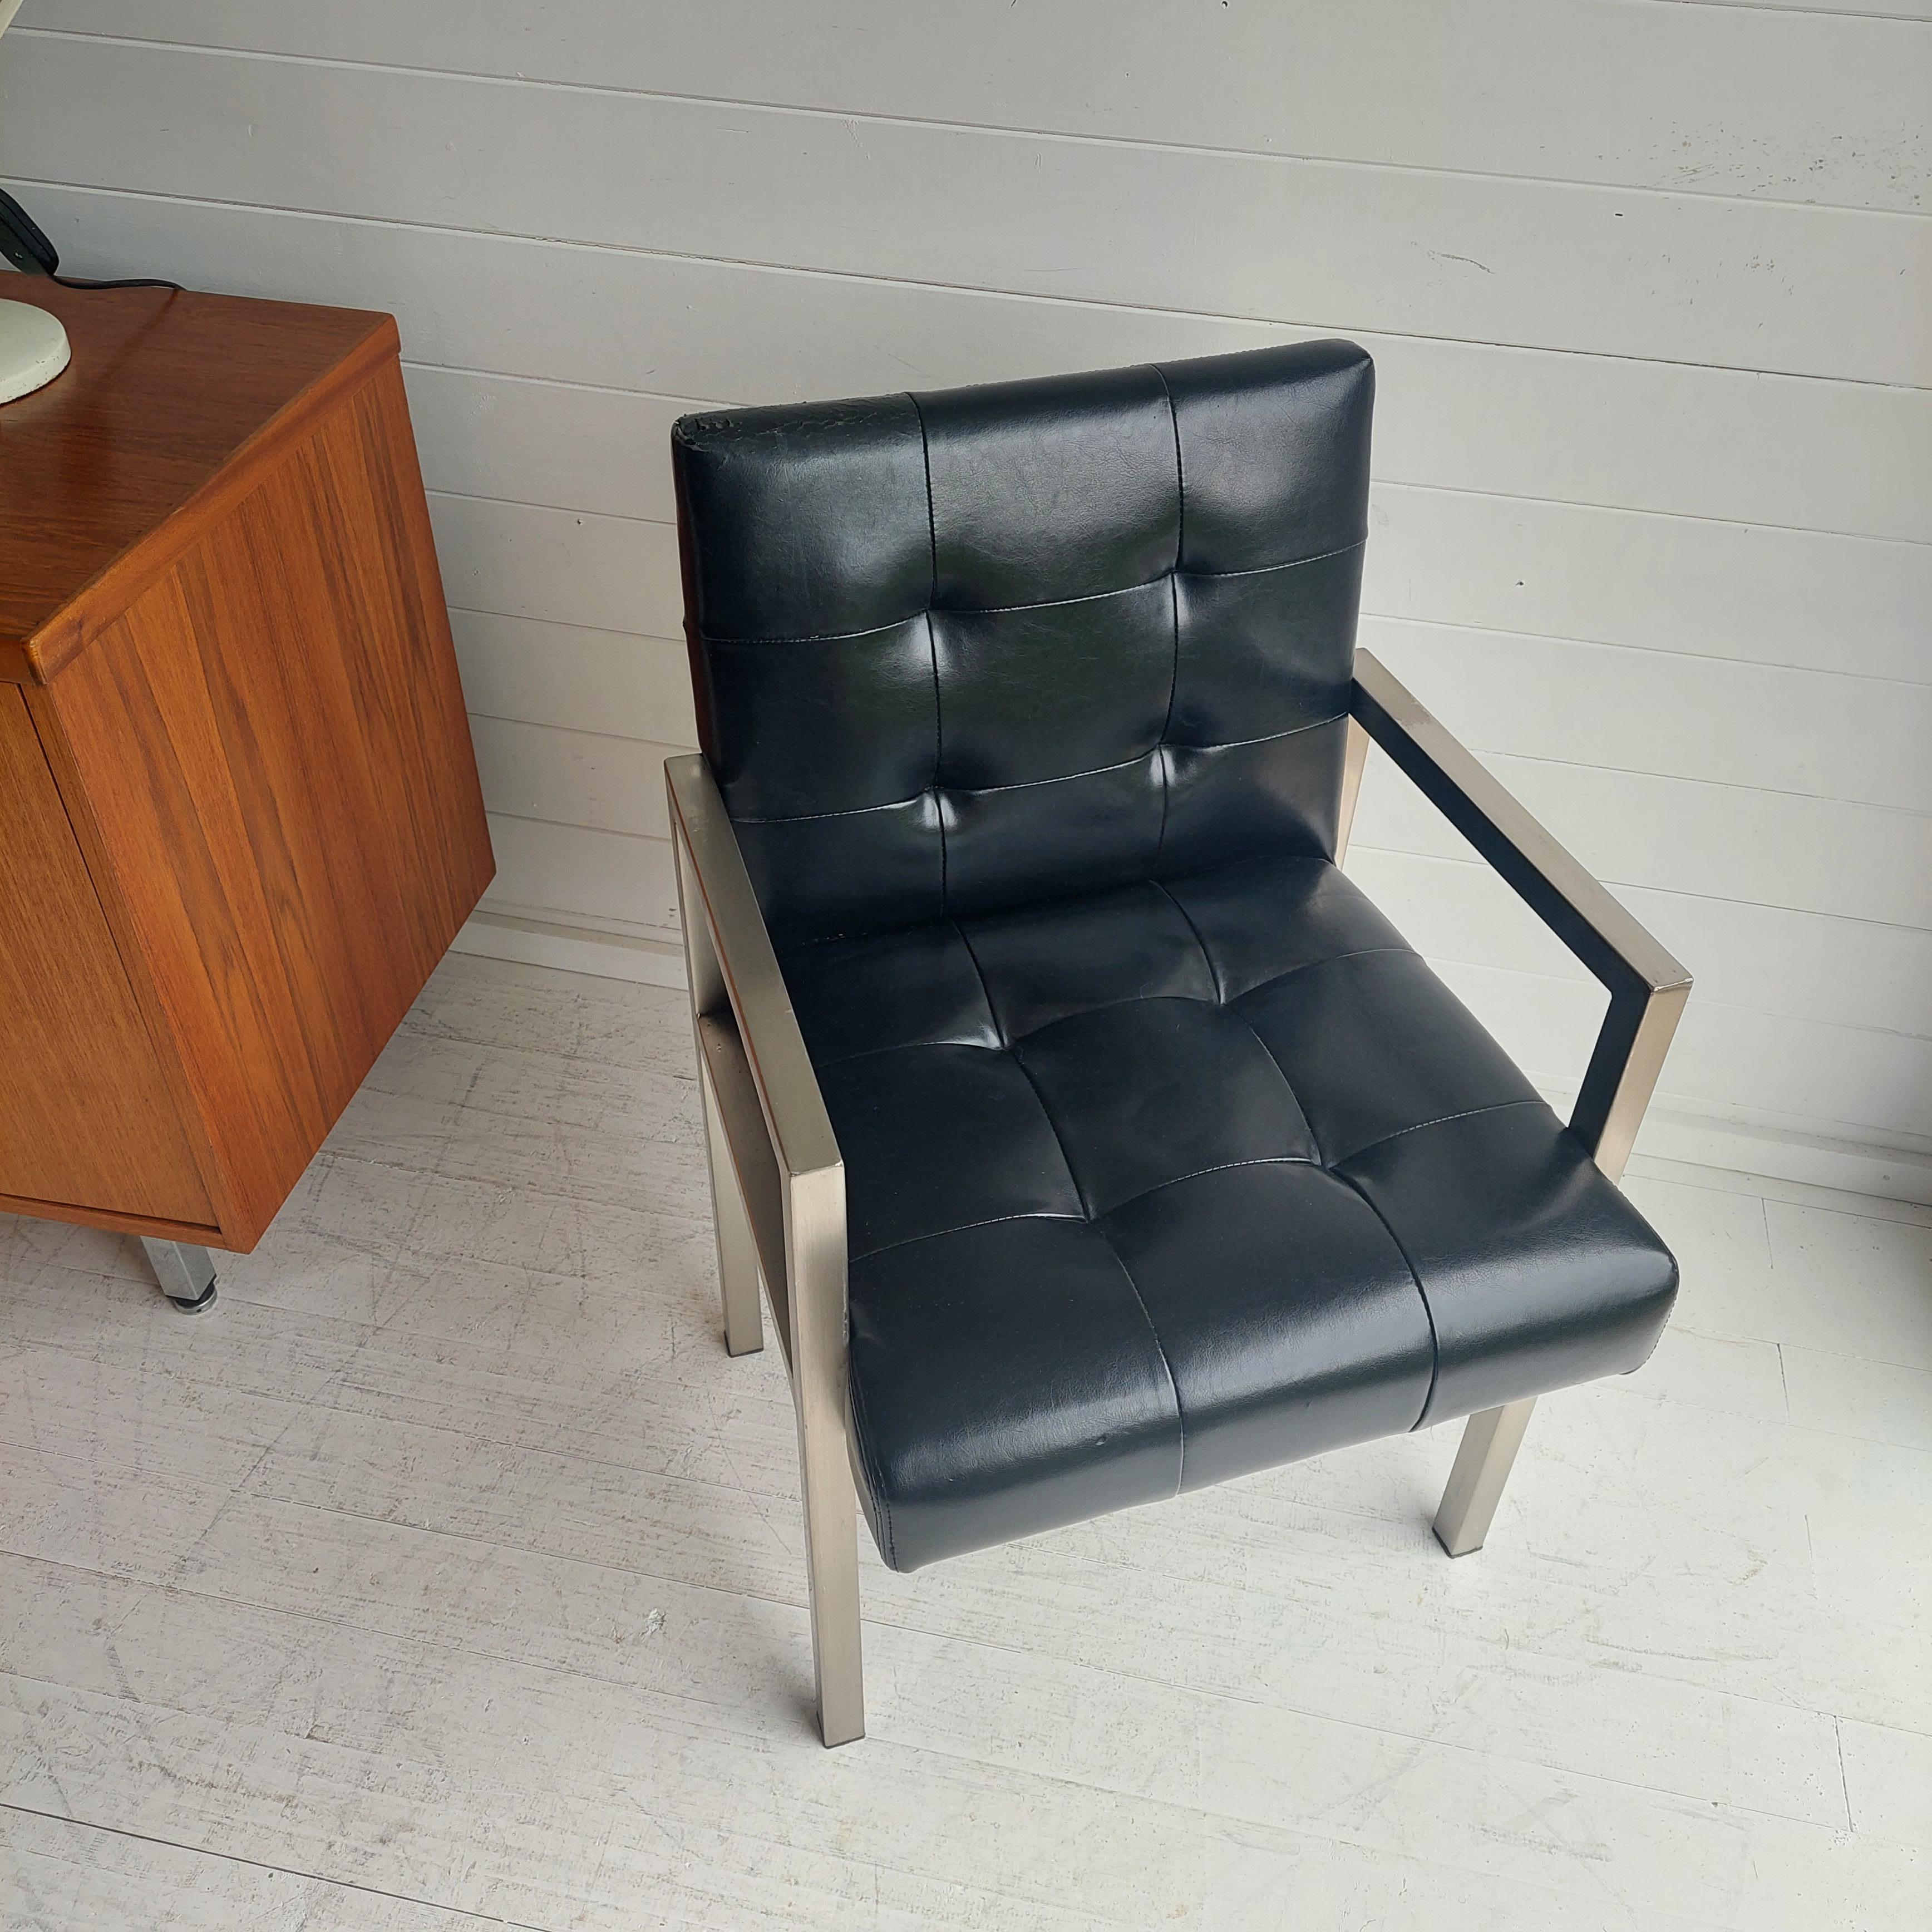 Midcentury Black Vinyl Accent Chair Minimal Retro Vintage Waiting Room Armchair In Good Condition For Sale In Leamington Spa, GB